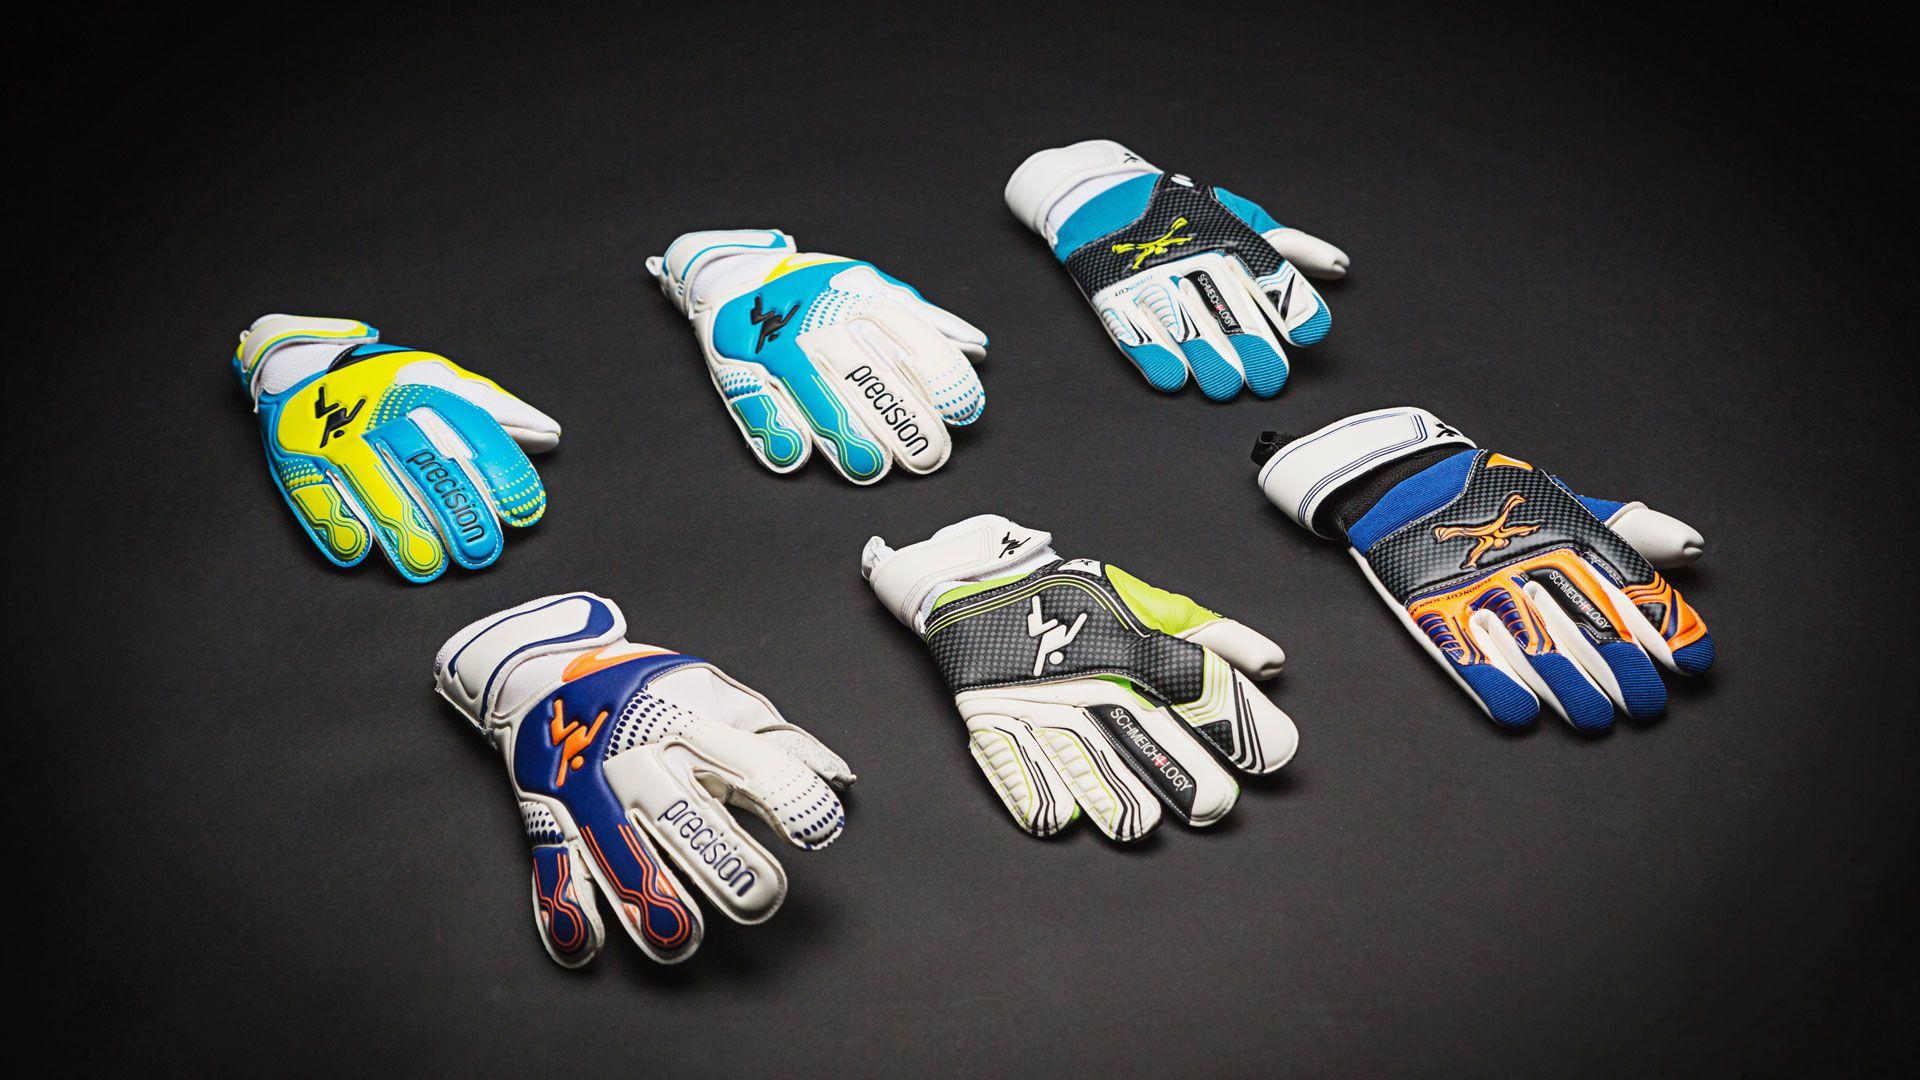 New goalkeepers gloves for Schmeichel from Precision